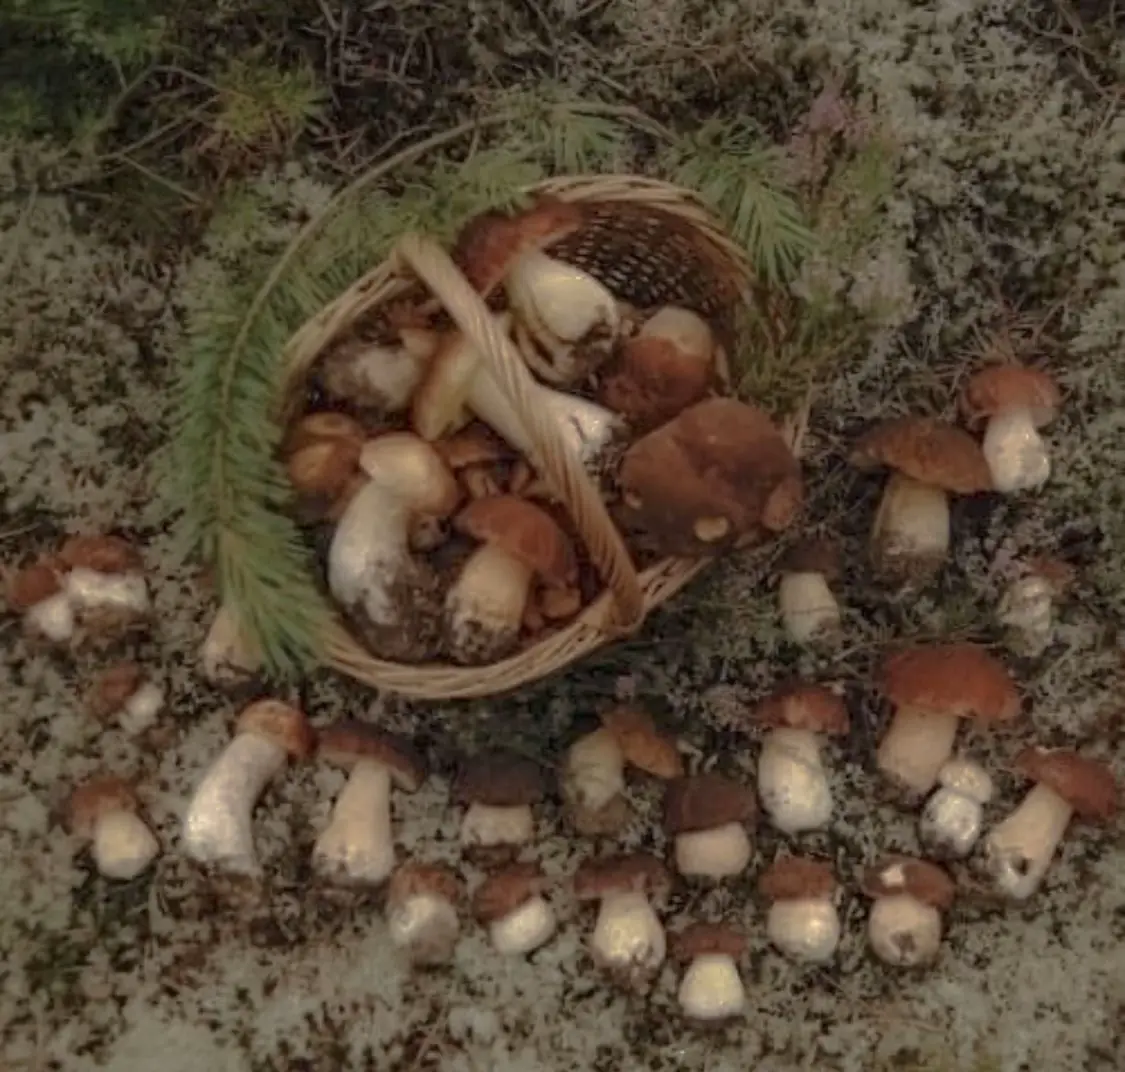  A basket of mushrooms on a ground.